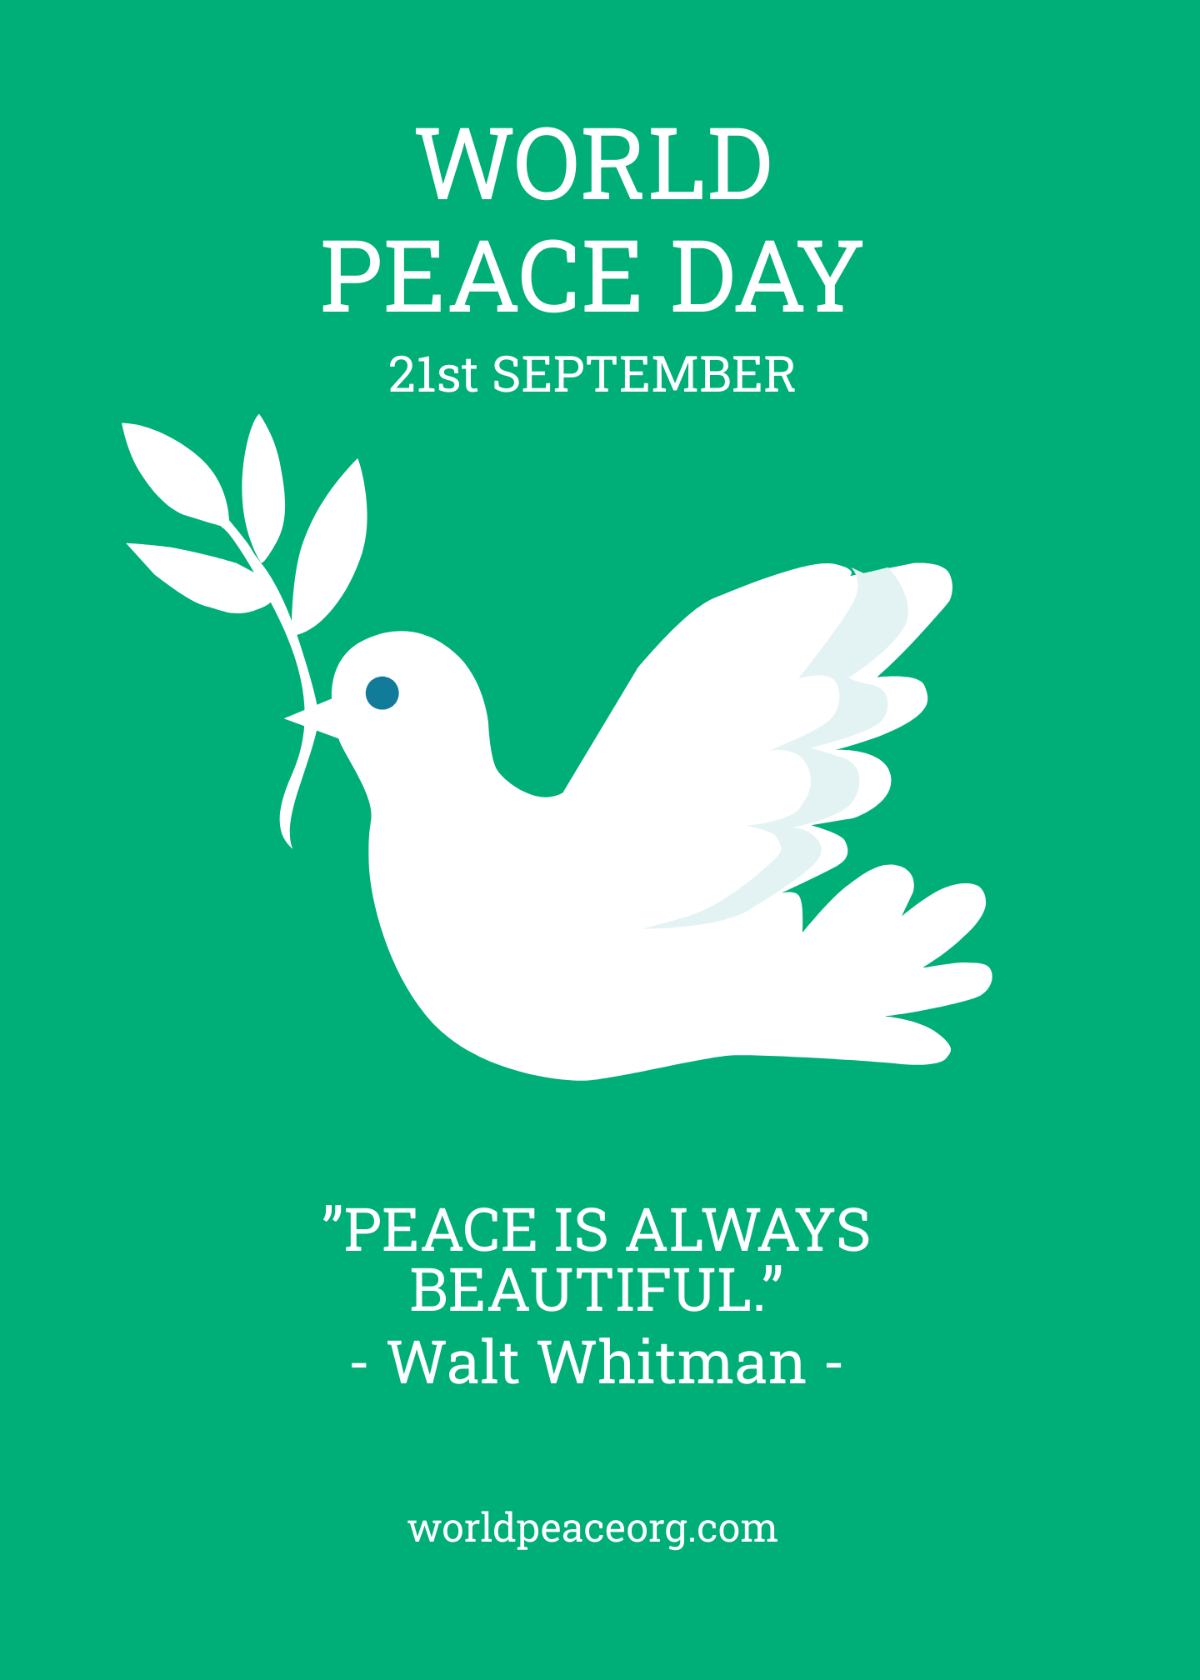 World Peace Day Greeting Card